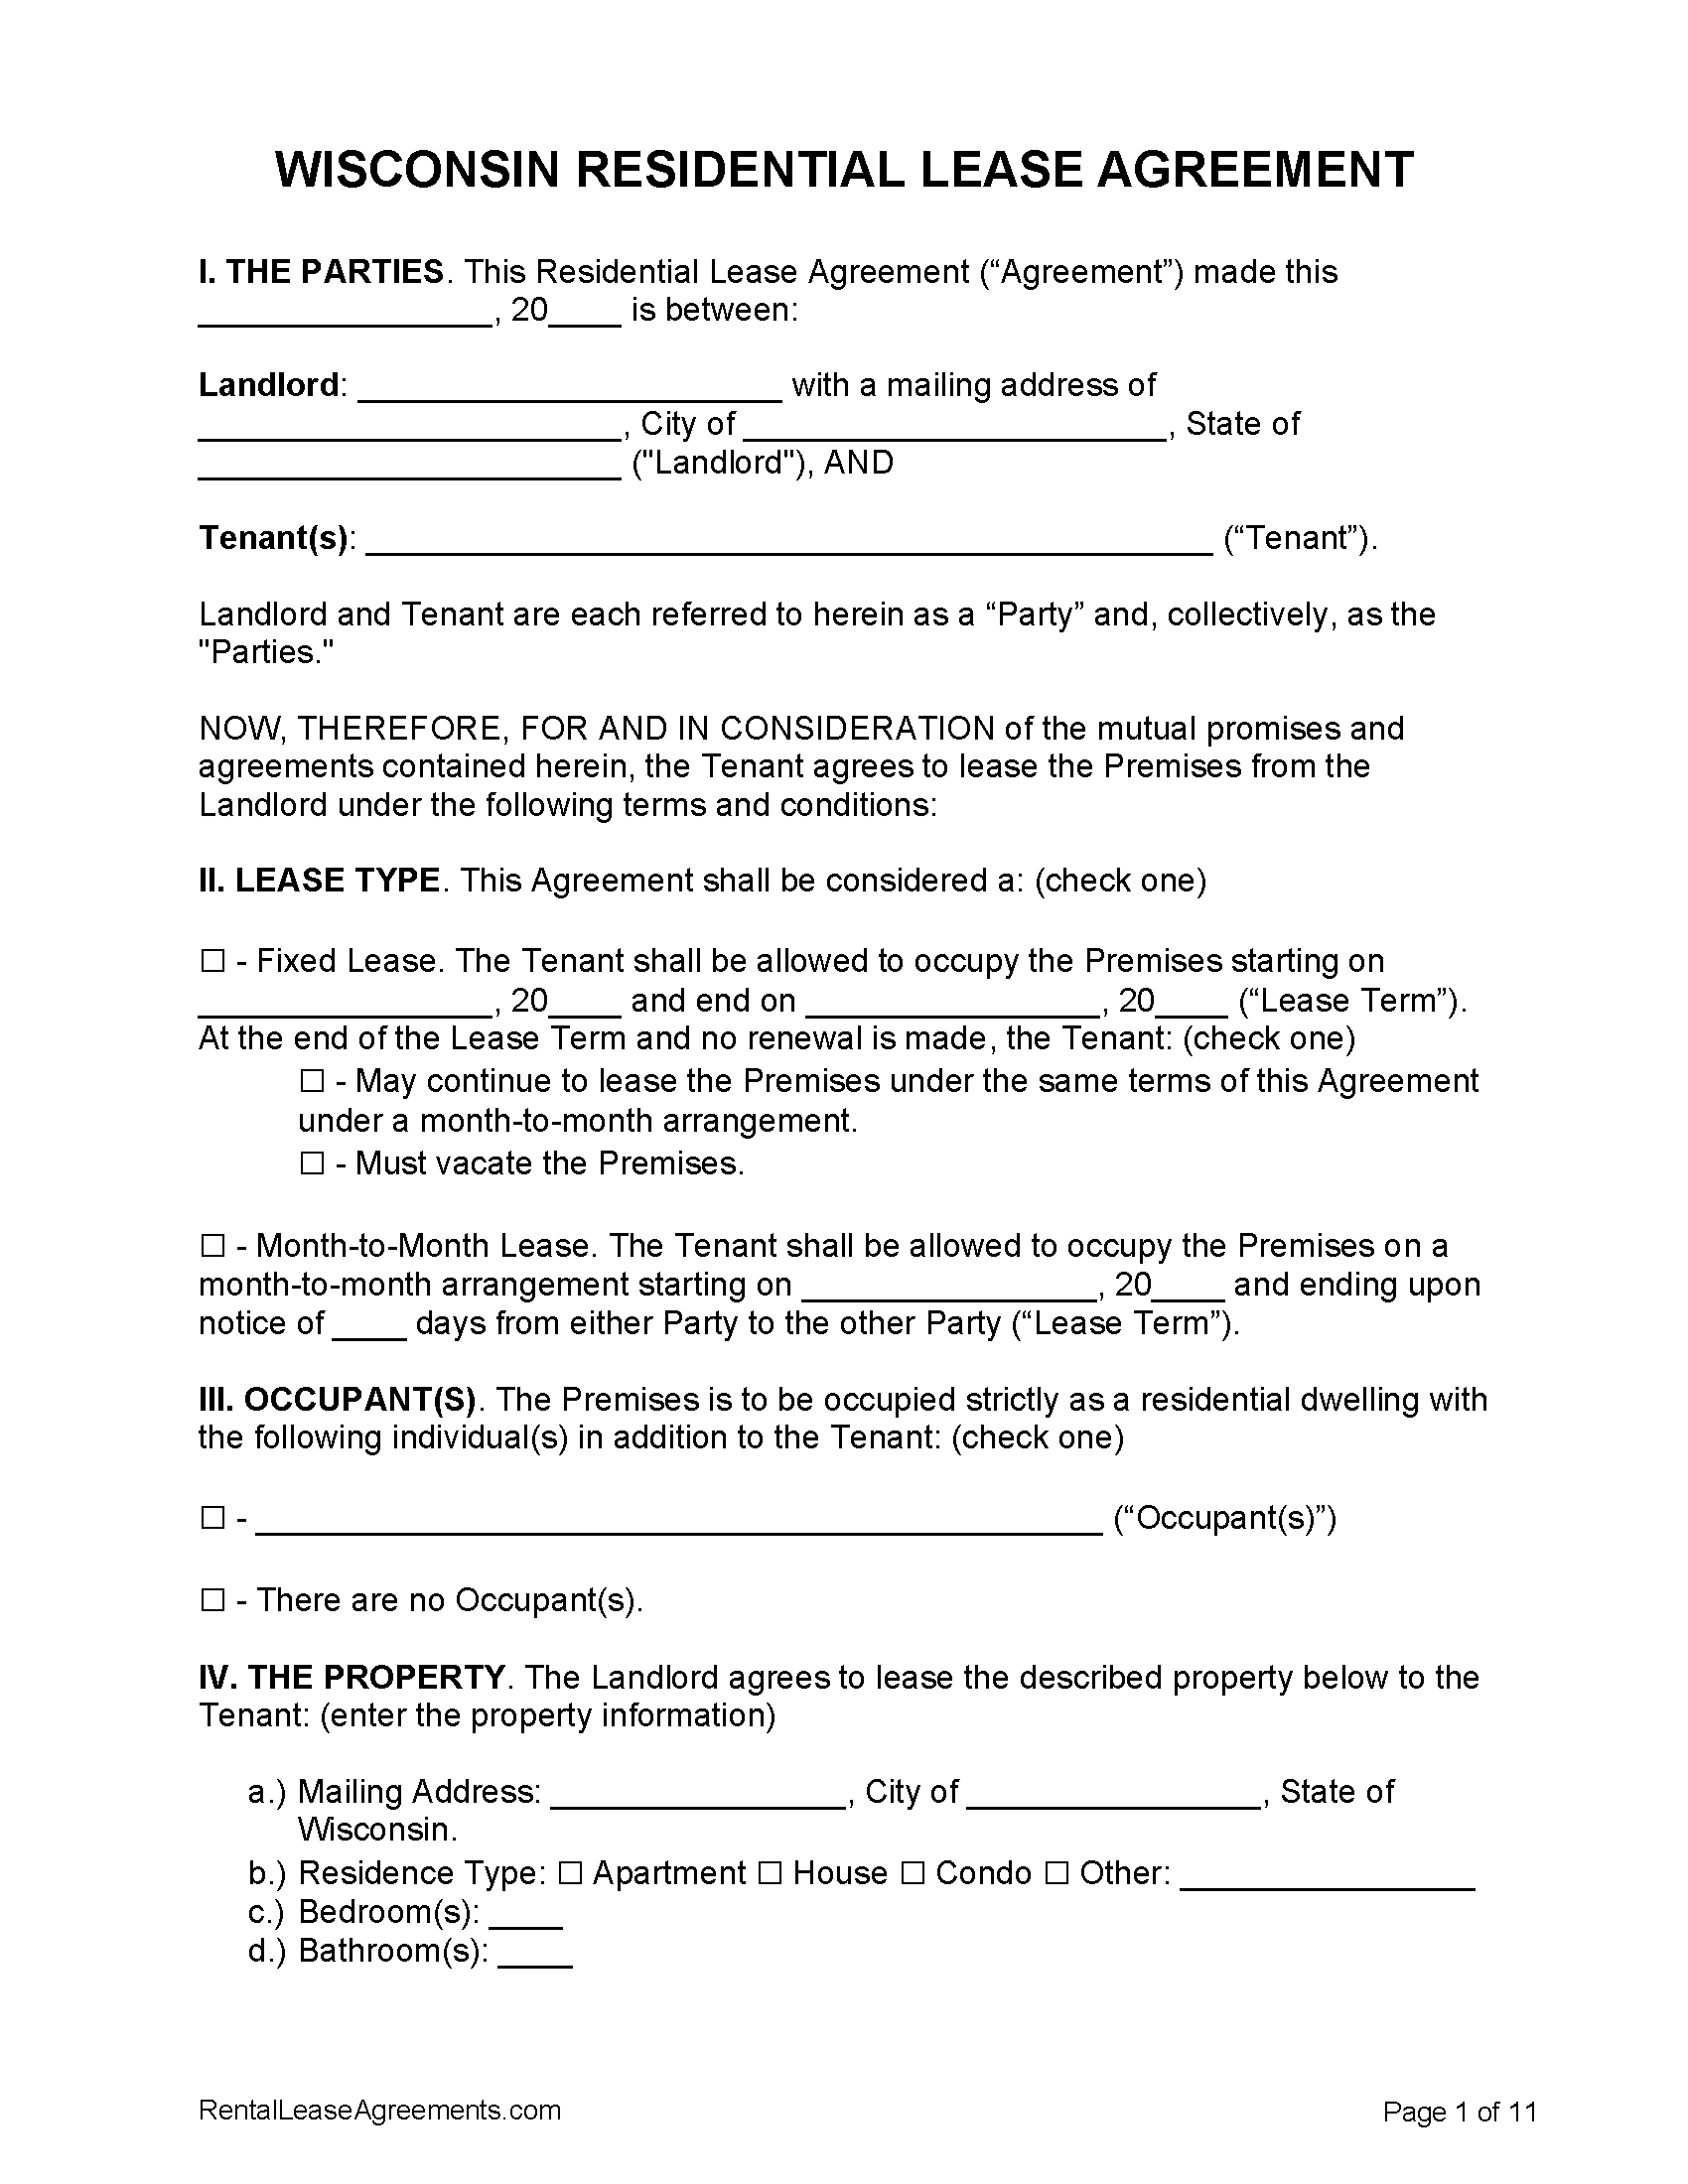 wisconsin-residential-lease-agreement-pdf-ms-word-free-printable-rental-lease-agreement